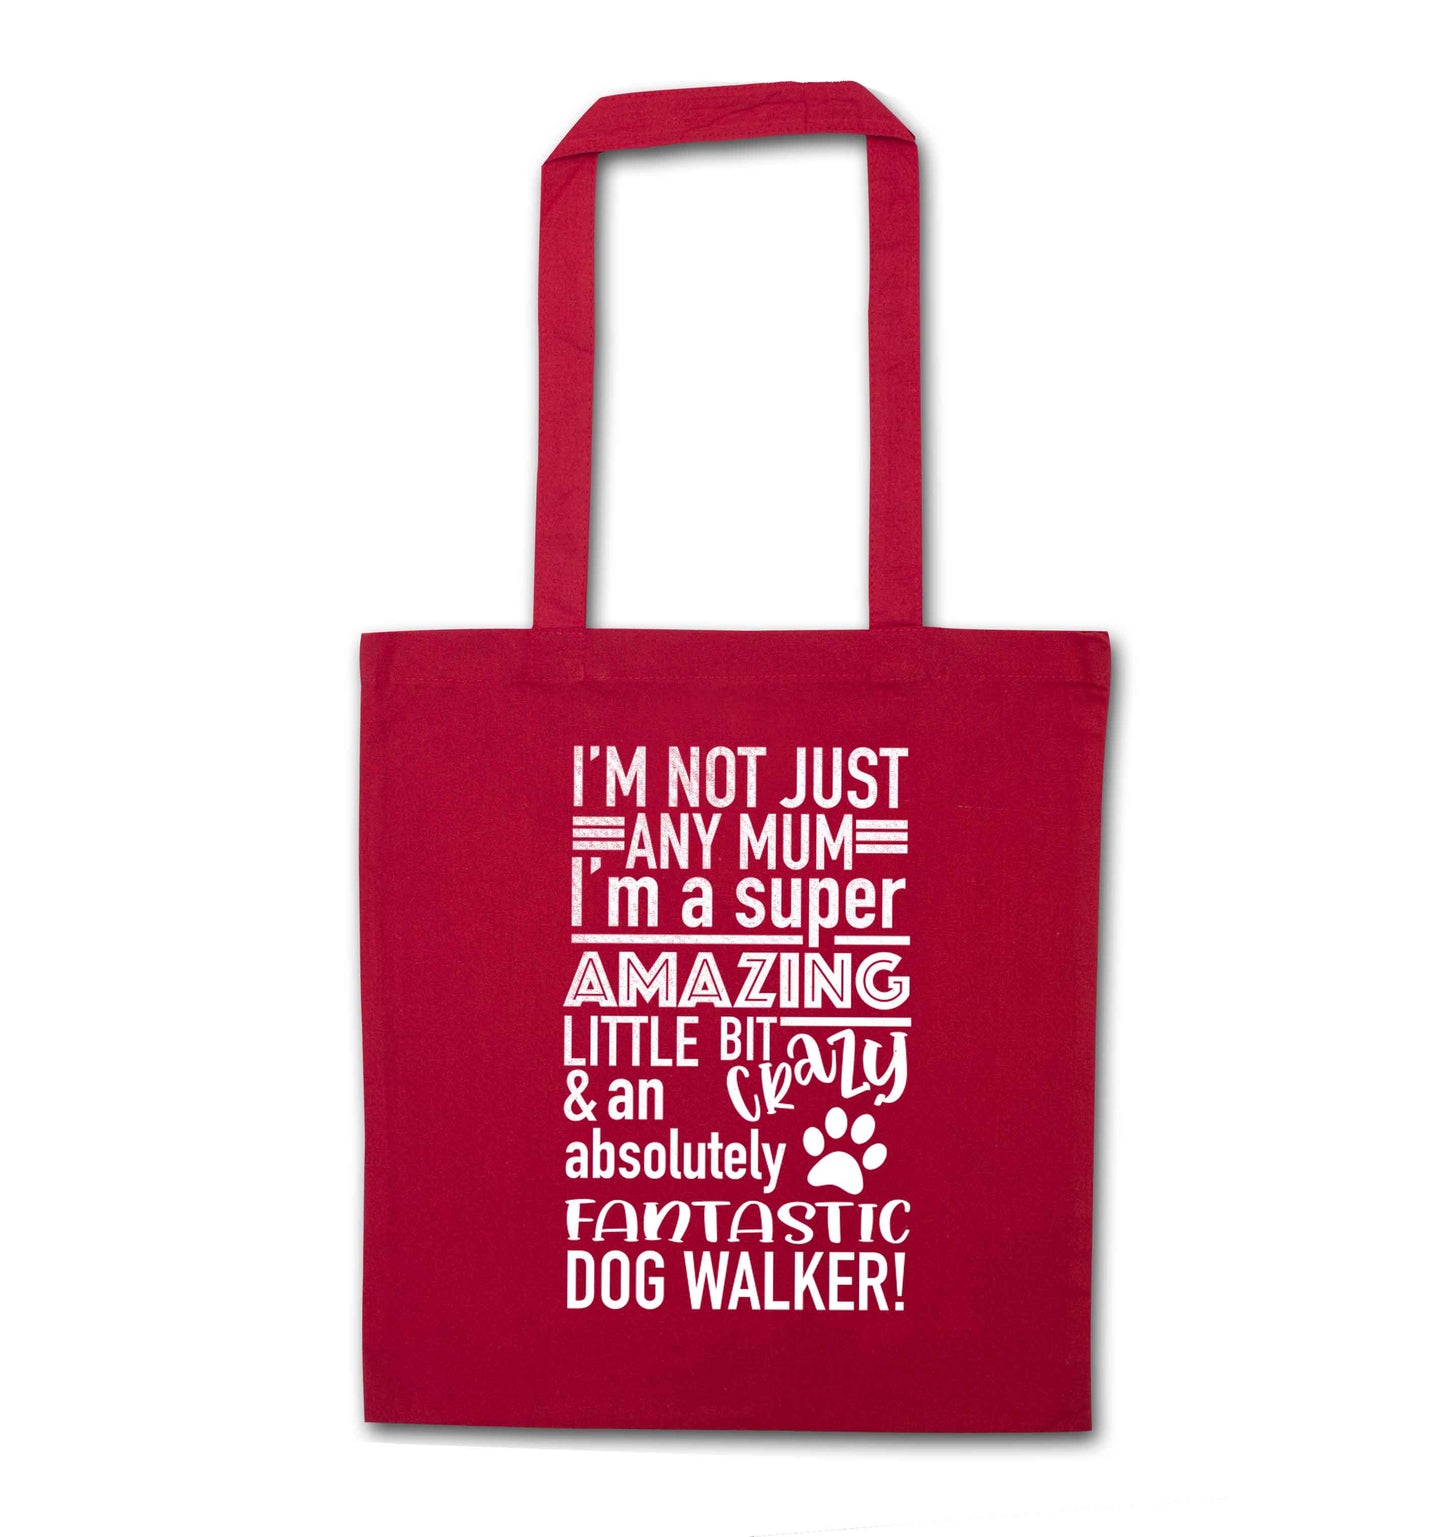 I'm not just any mum I'm a super amazing little bit crazy and an absolutely fantastic dog walker! red tote bag